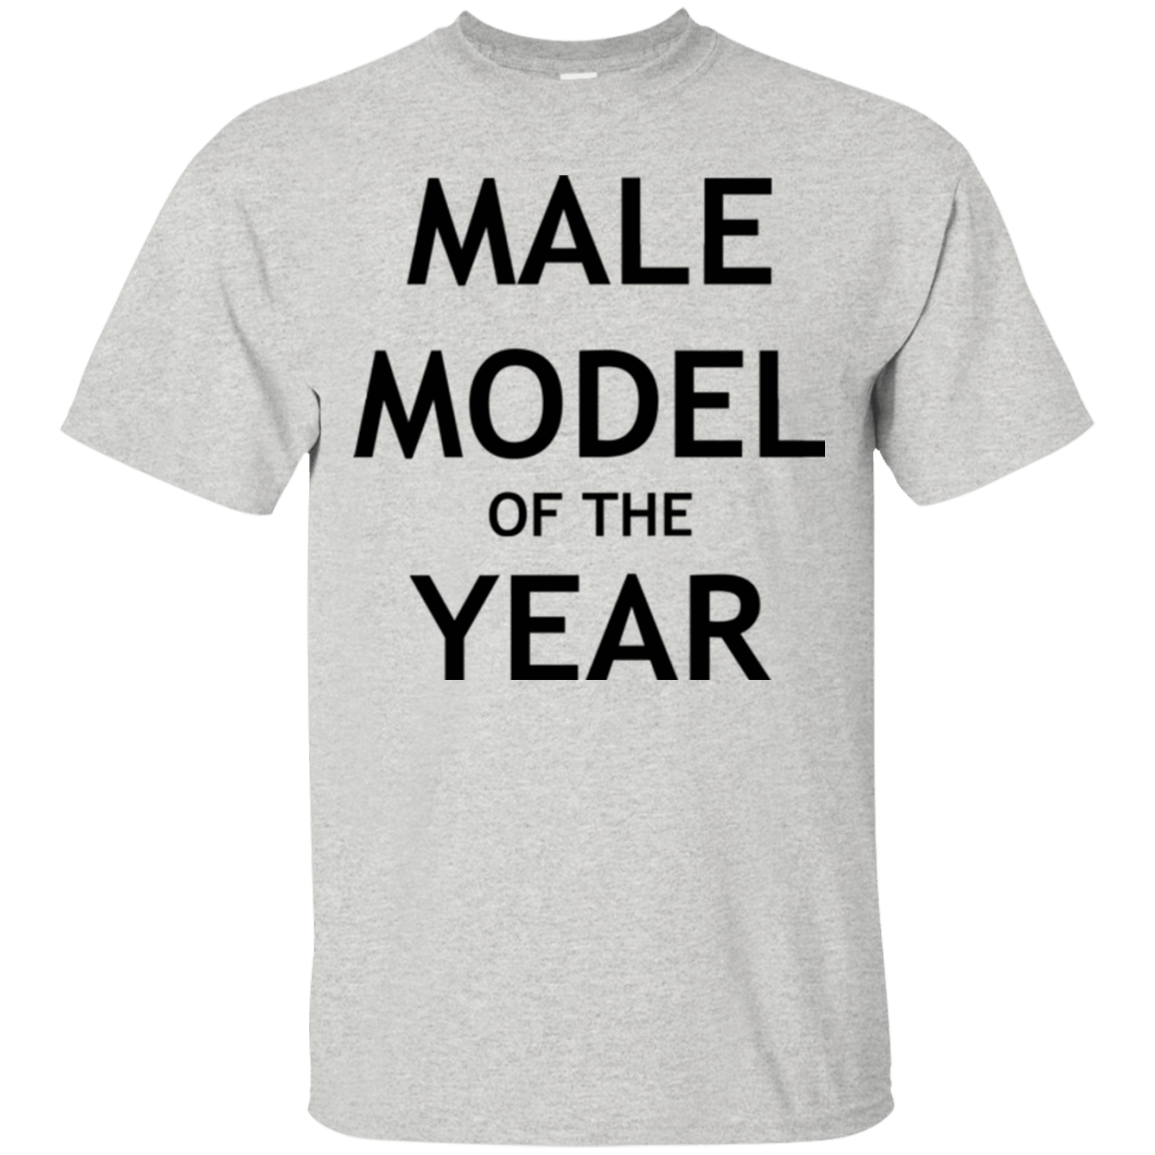 T-Shirts Ash / Small Model of the Year T-Shirt